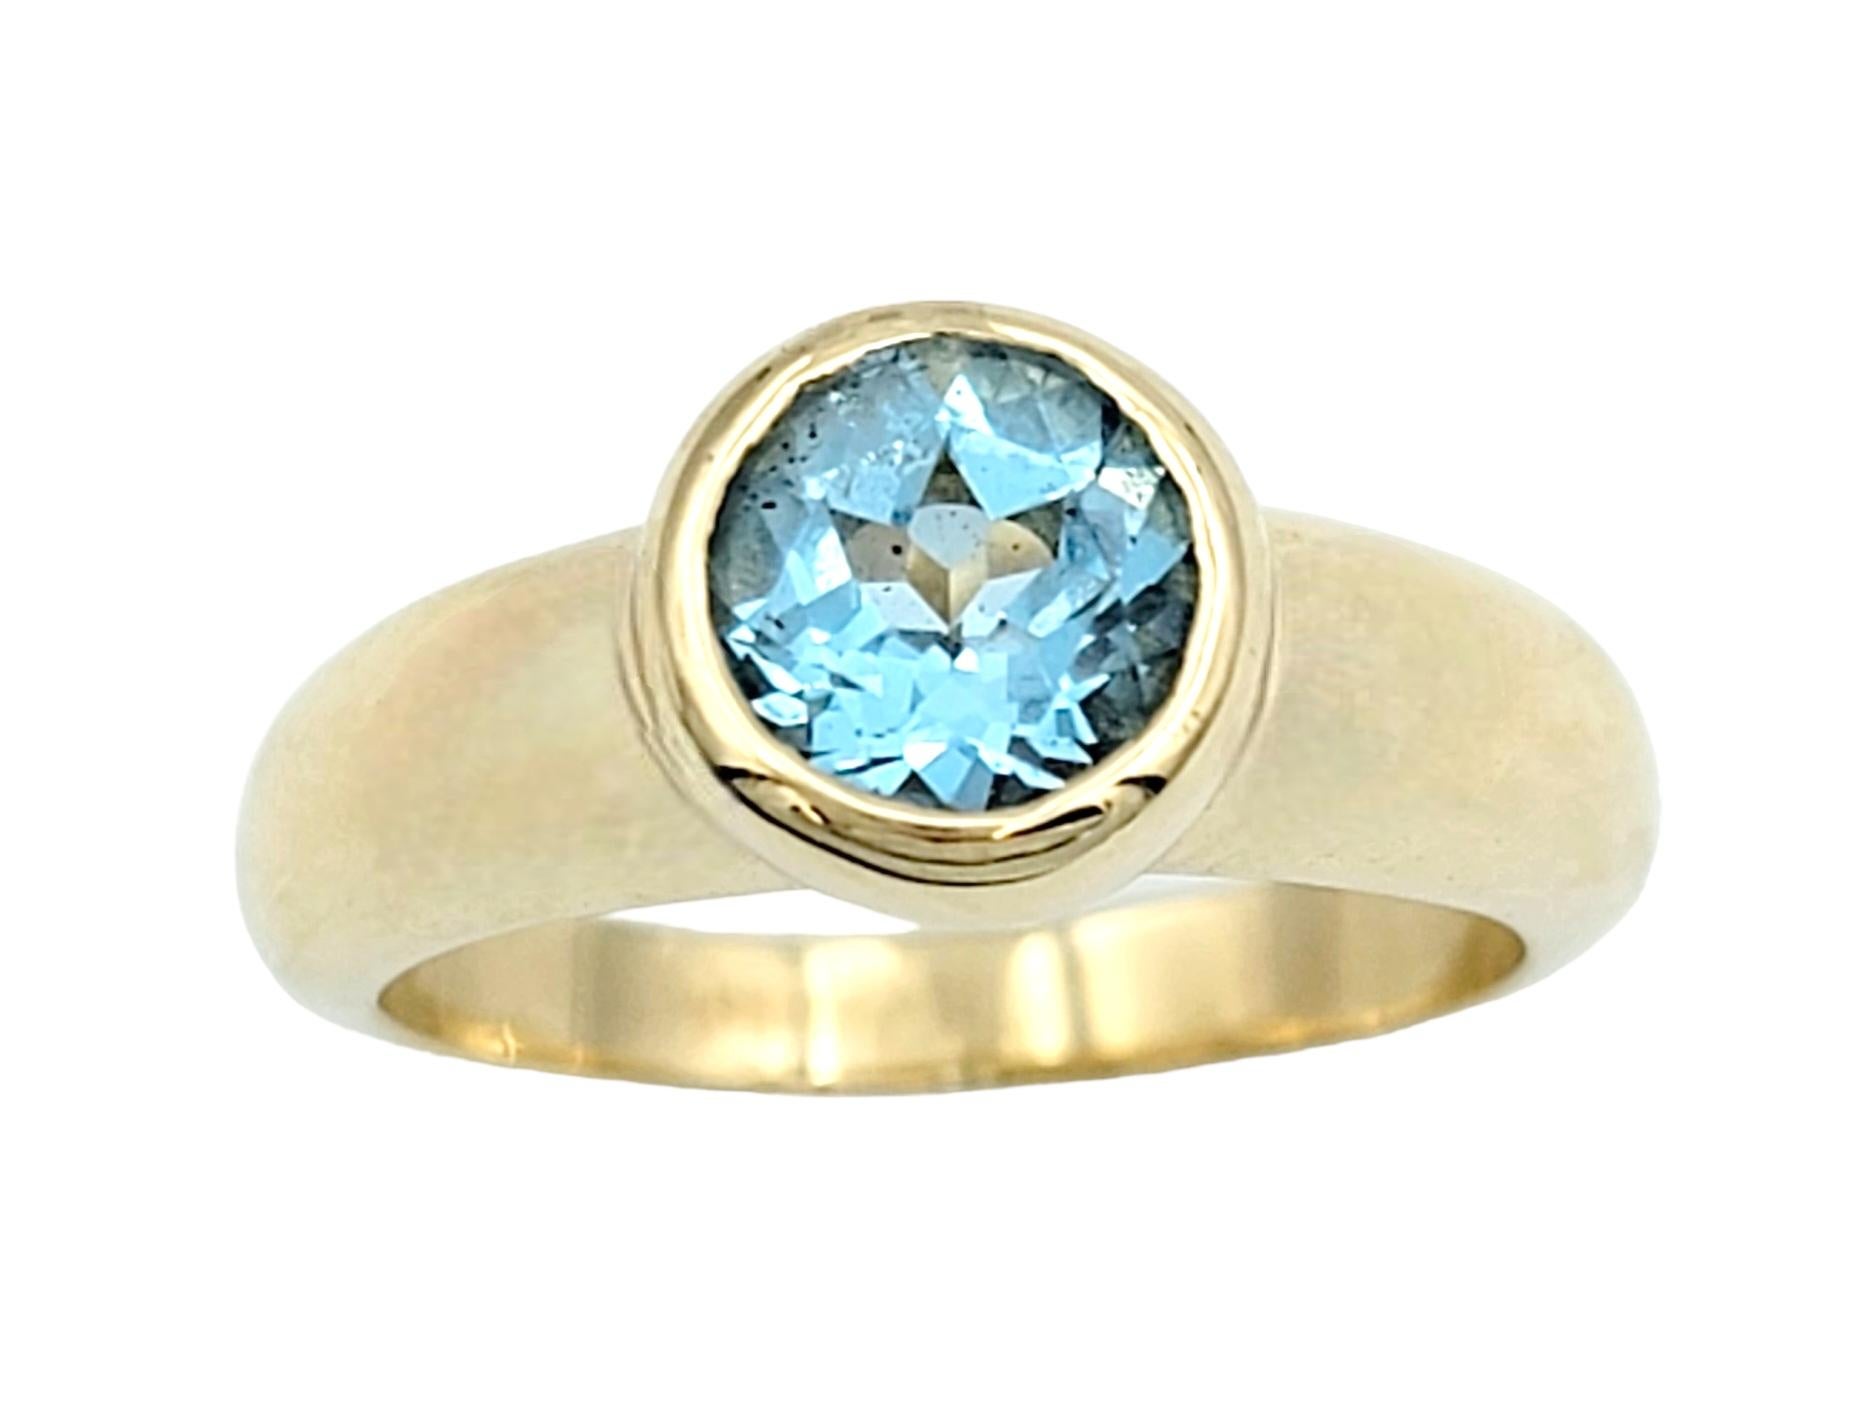 Ring Size: 6

Sleek and contemporary blue topaz solitaire ring in lustrous 14 karat yellow gold. This exquisite piece of jewelry embodies both elegance and modernity, making it the perfect accessory for any occasion.

At the heart of this ring lies